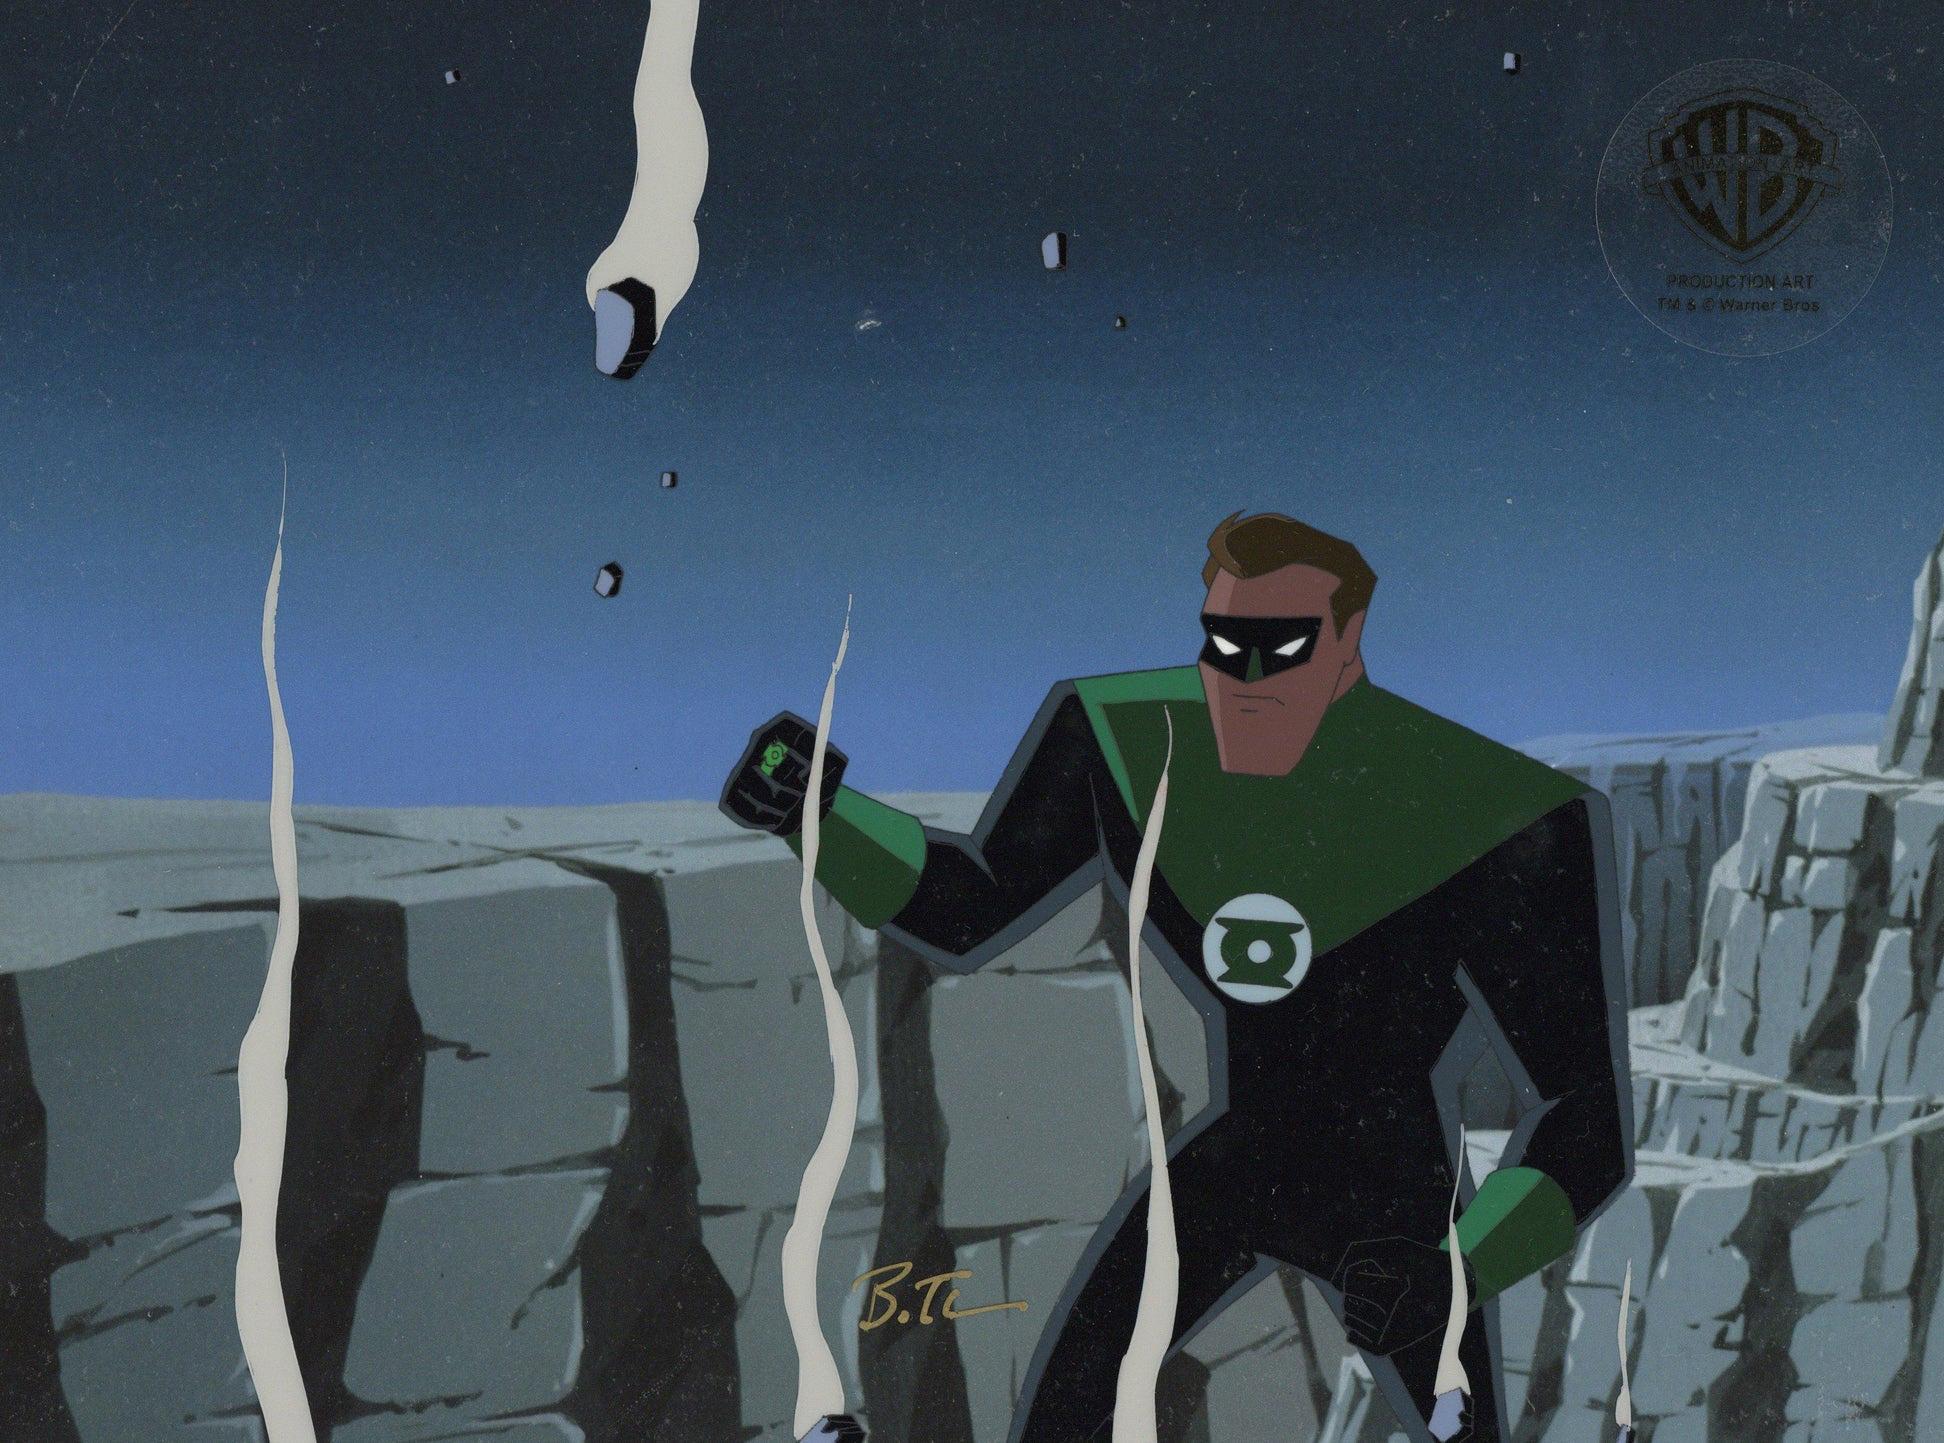 Superman the Animated Series Cel w/ Drawing Signed by Bruce Timm: Green Lantern - Art by DC Comics Studio Artists